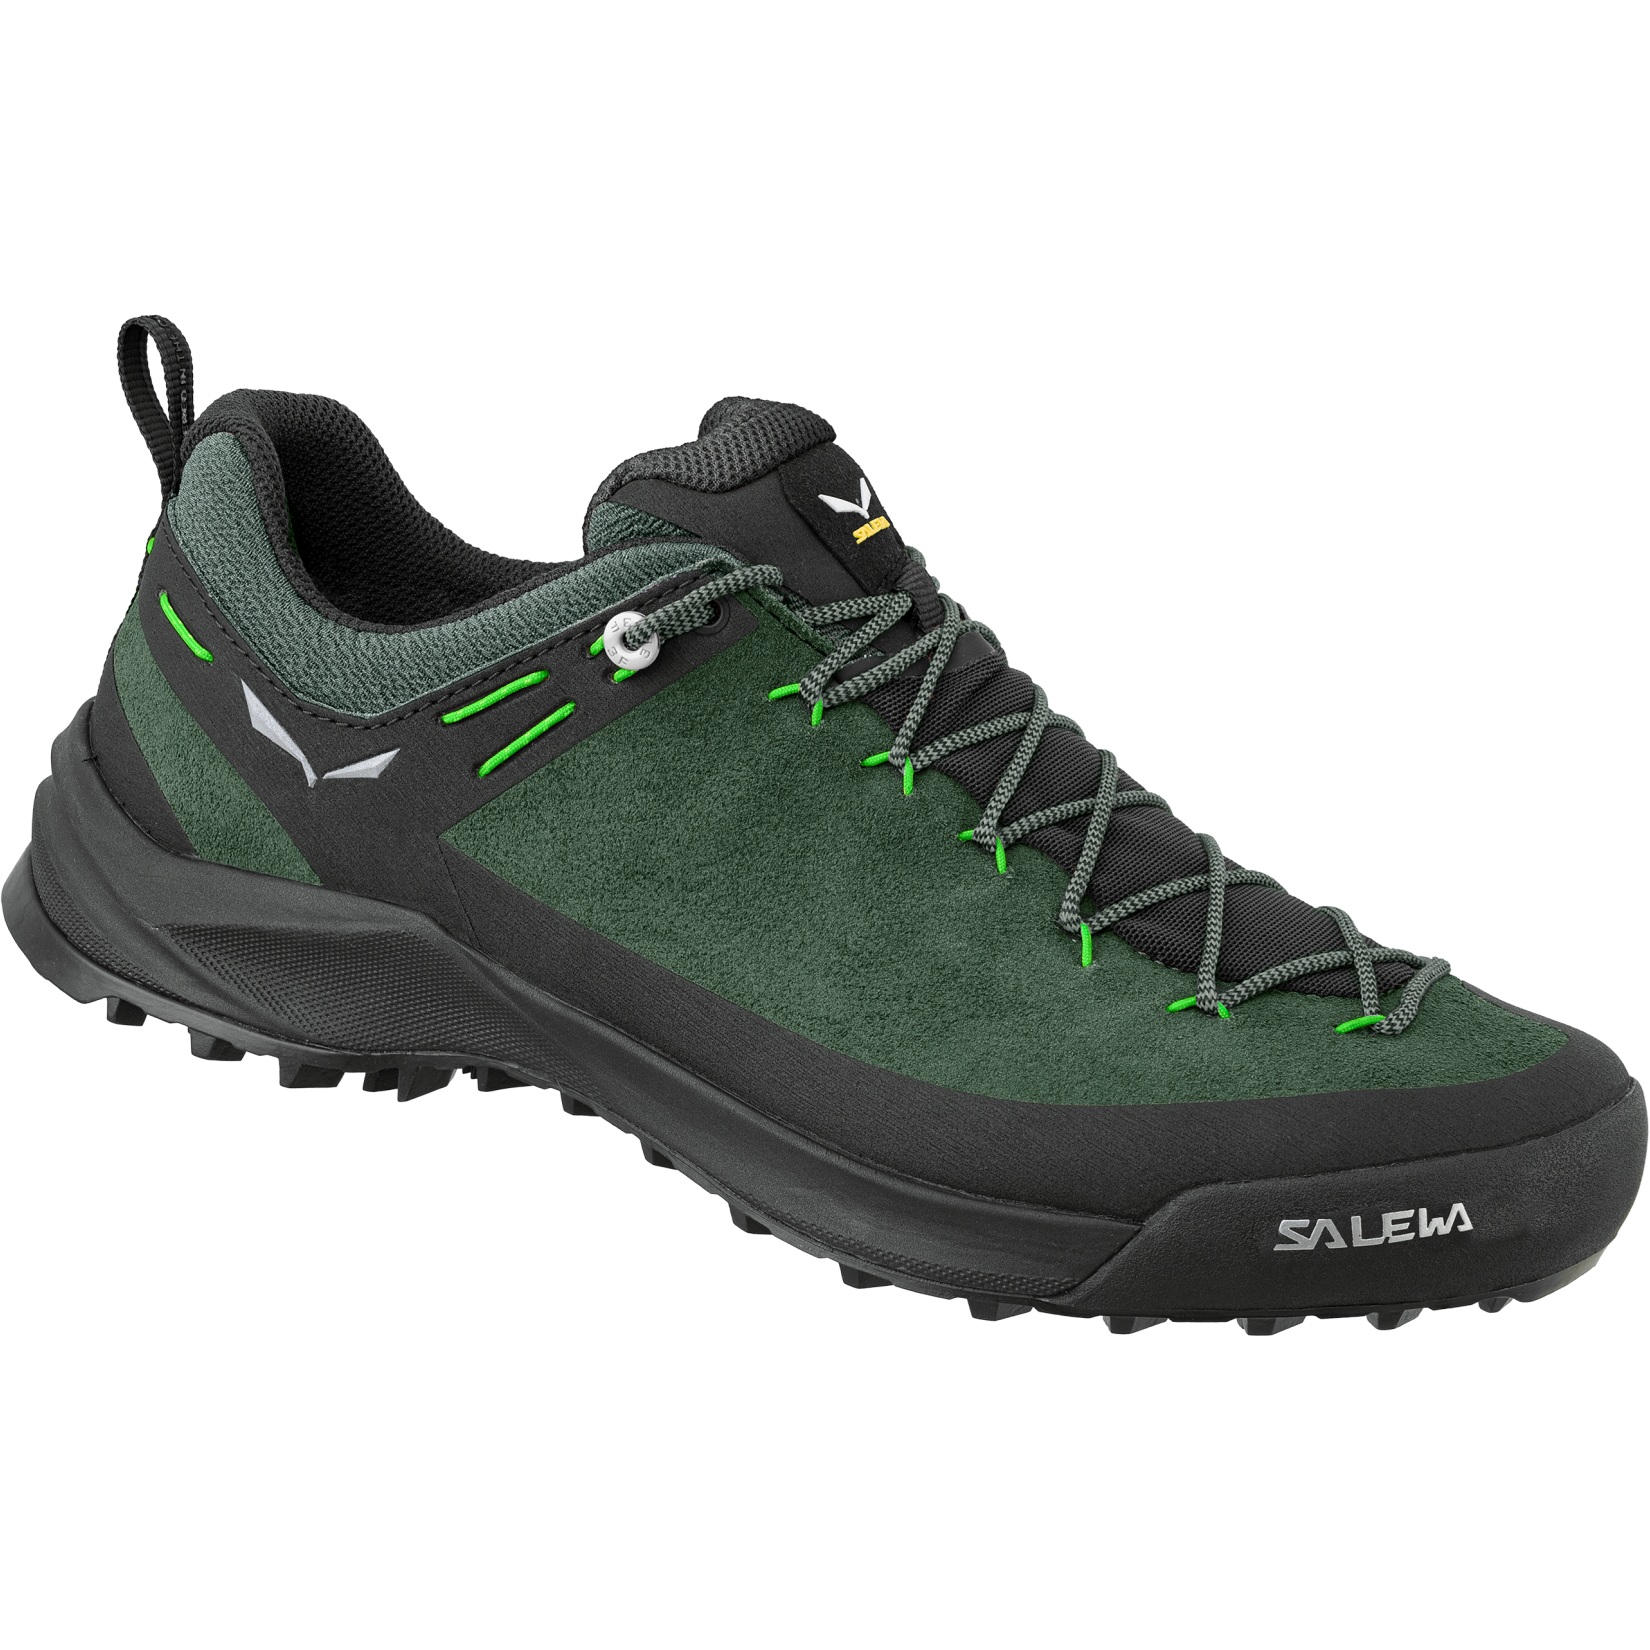 Image of Salewa Wildfire Leather Approach Shoes - raw green/black 5331